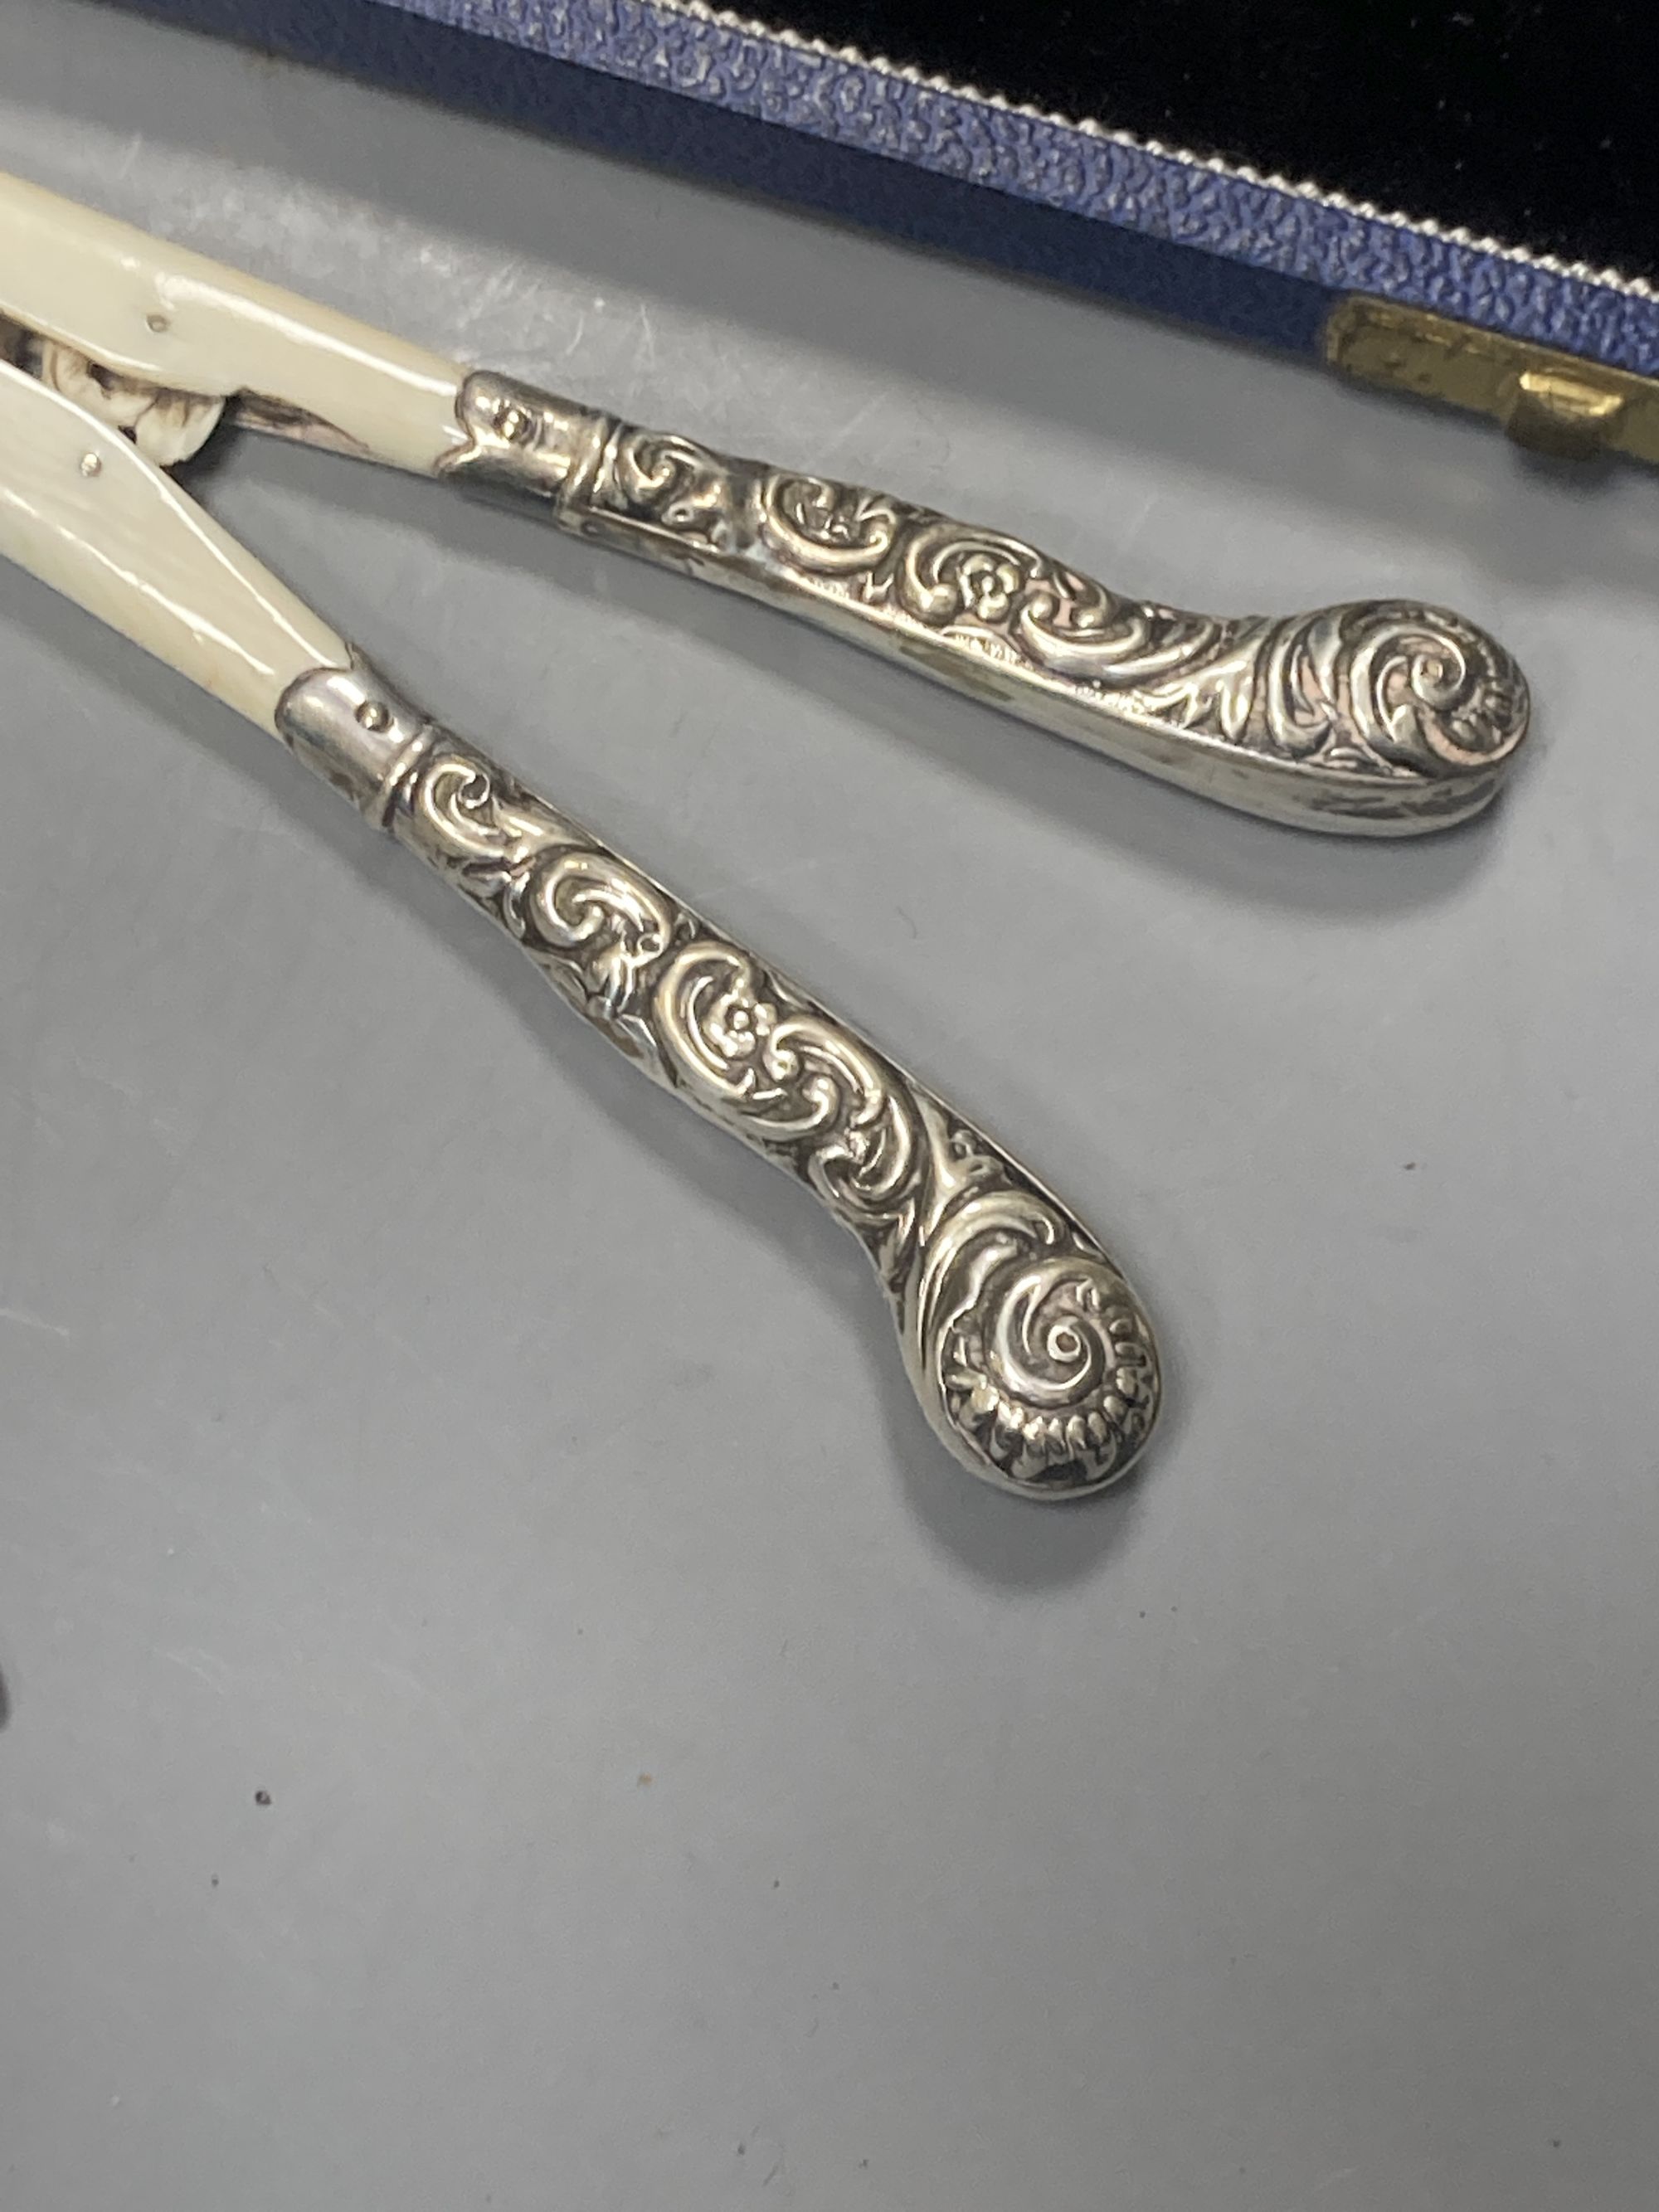 A cased set of six 1950s silver teaspoons, one other incomplete silver set and other flatware.